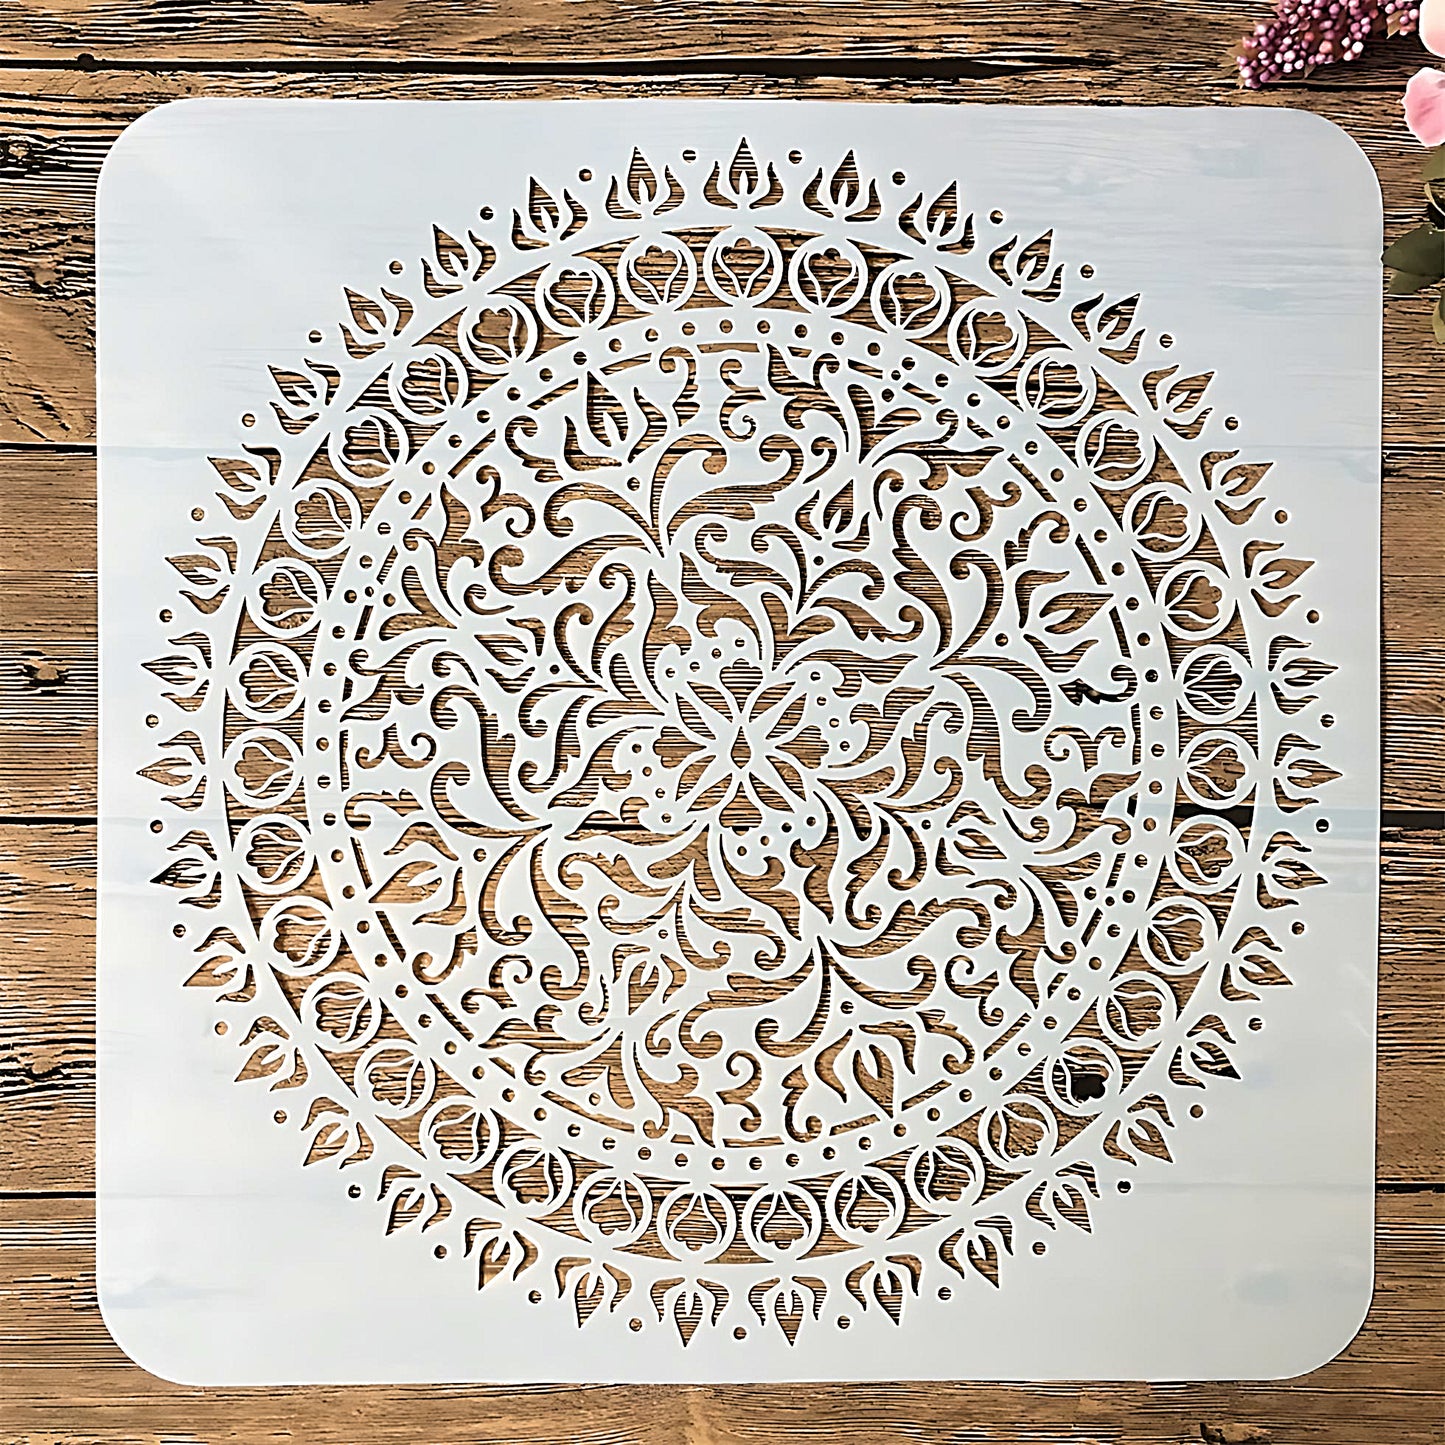 a large Mandala stencil in white color, on a wood table